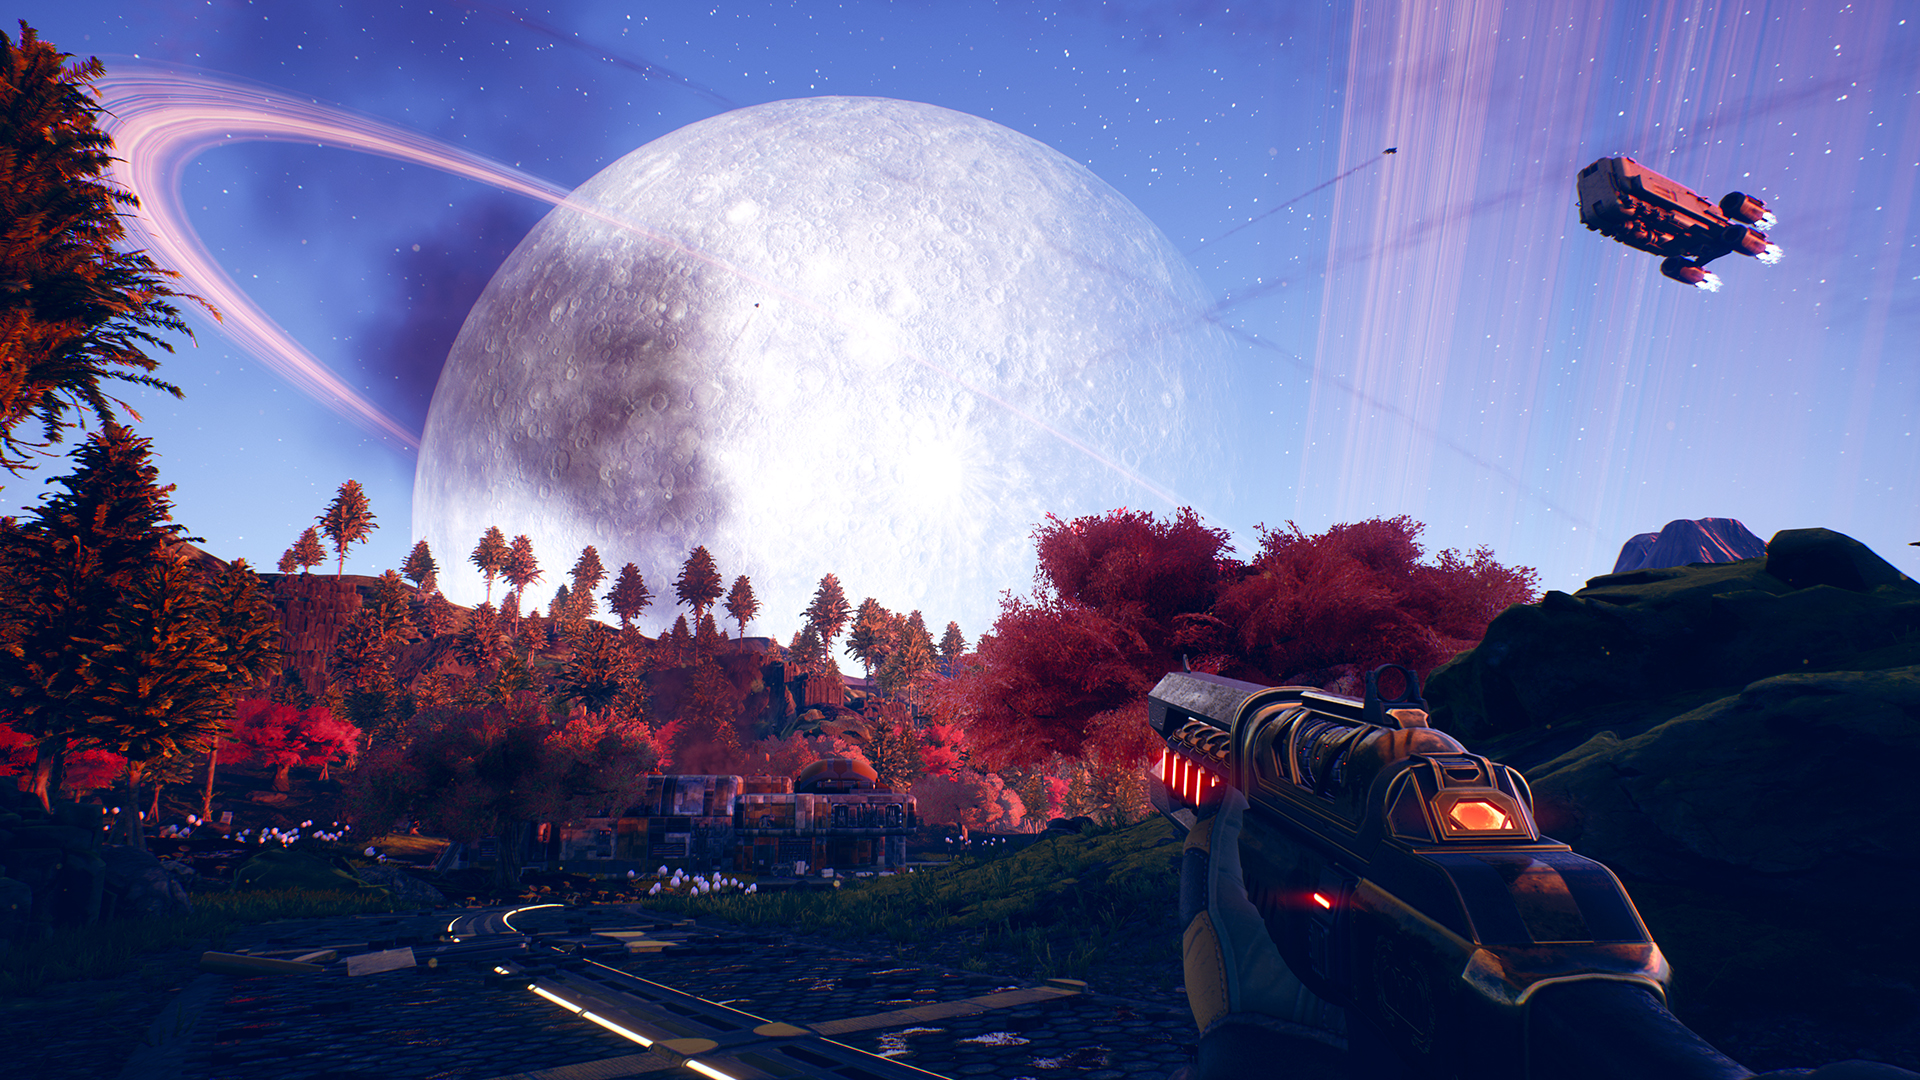 A screenshot from the video game "The Outer Worlds:" a full moon over a planet covered in trees